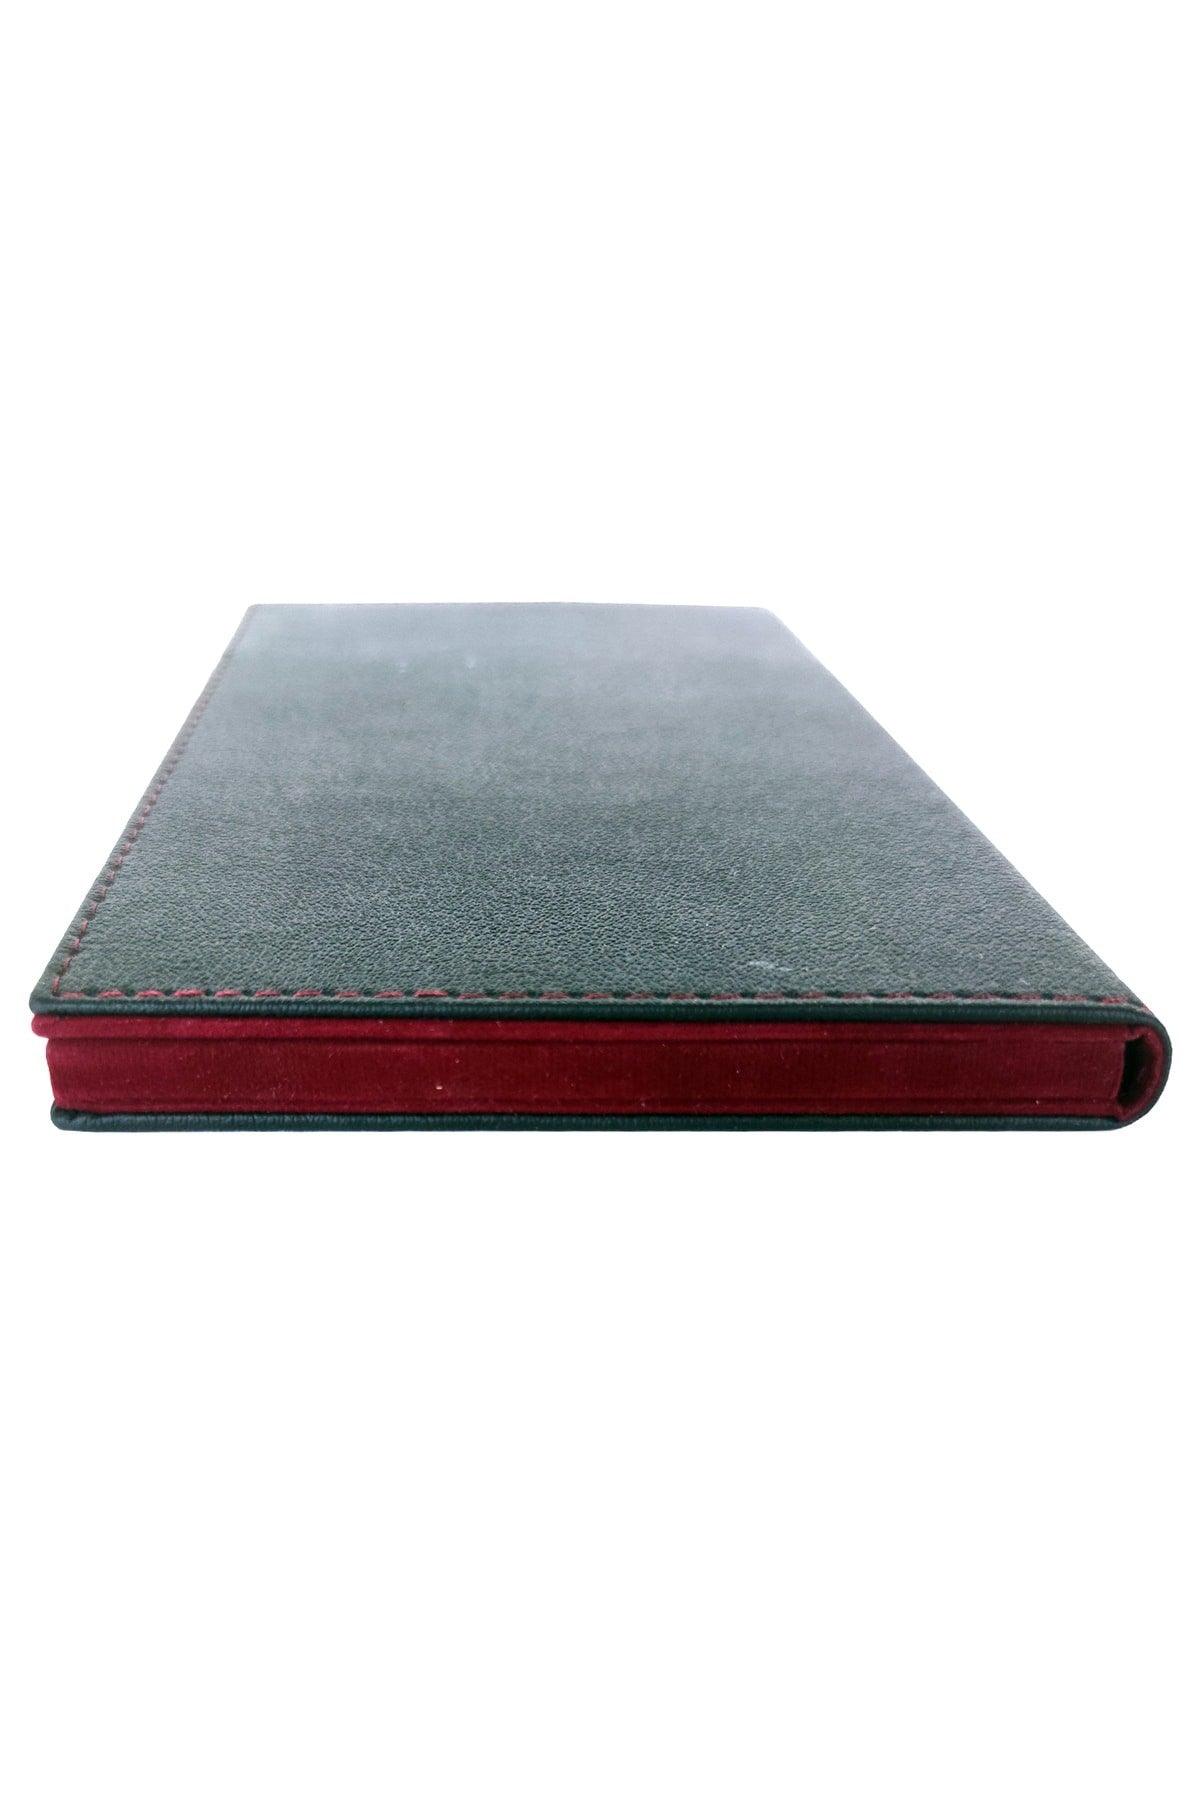 (1 Piece) Leather Accounting Pad Box